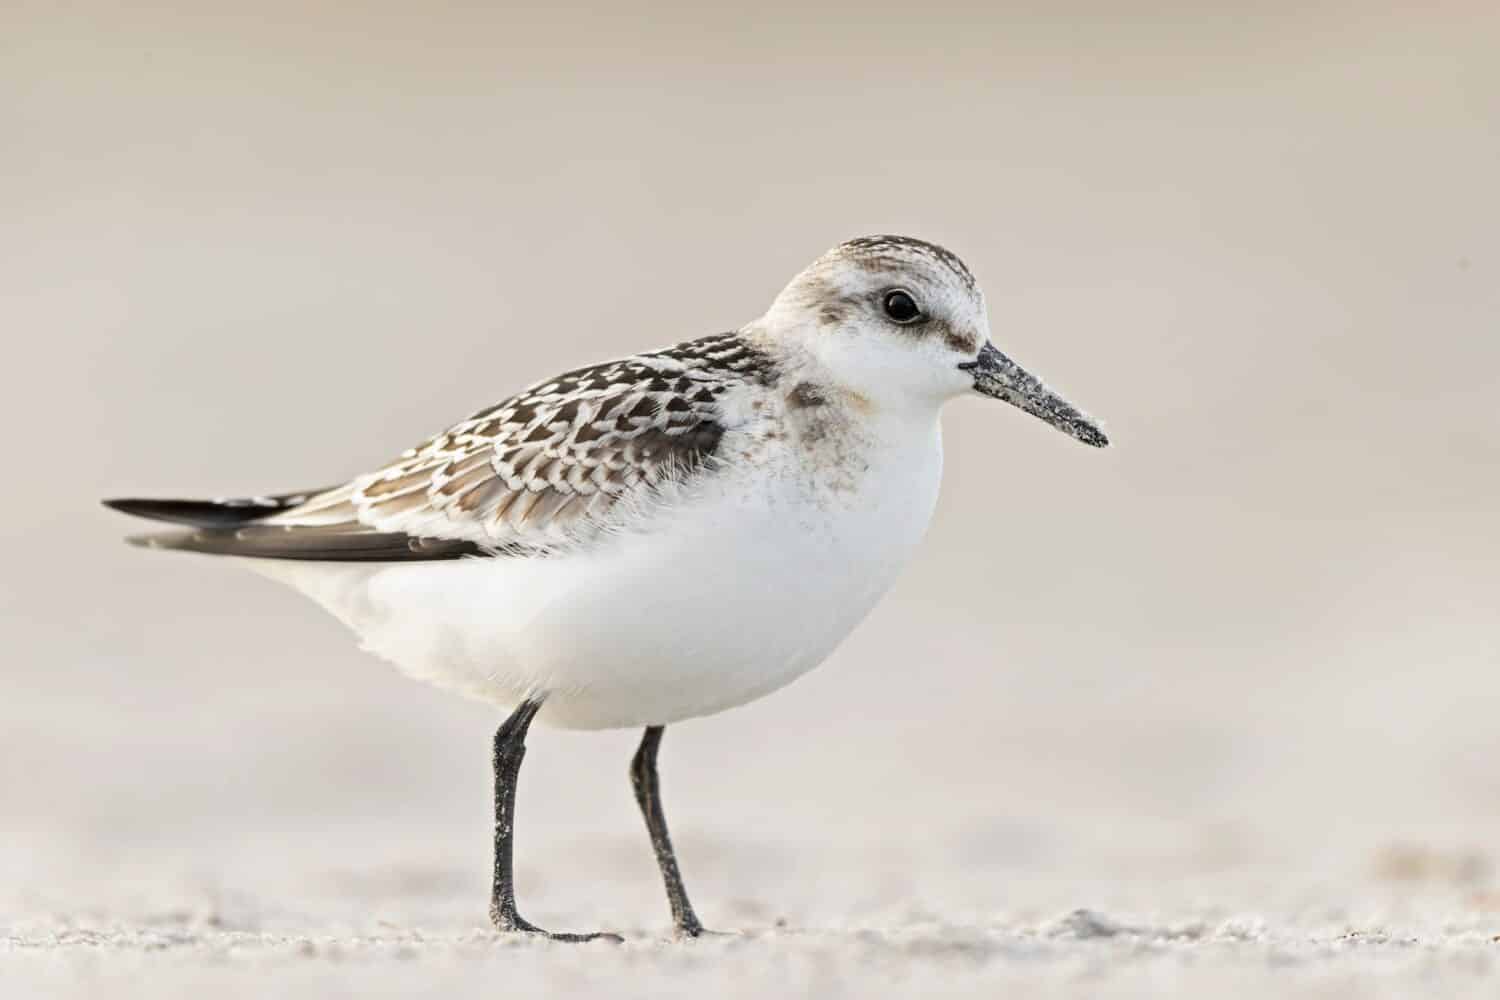 A sanderling (Calidris alba) foraging during fall migration on the beach.